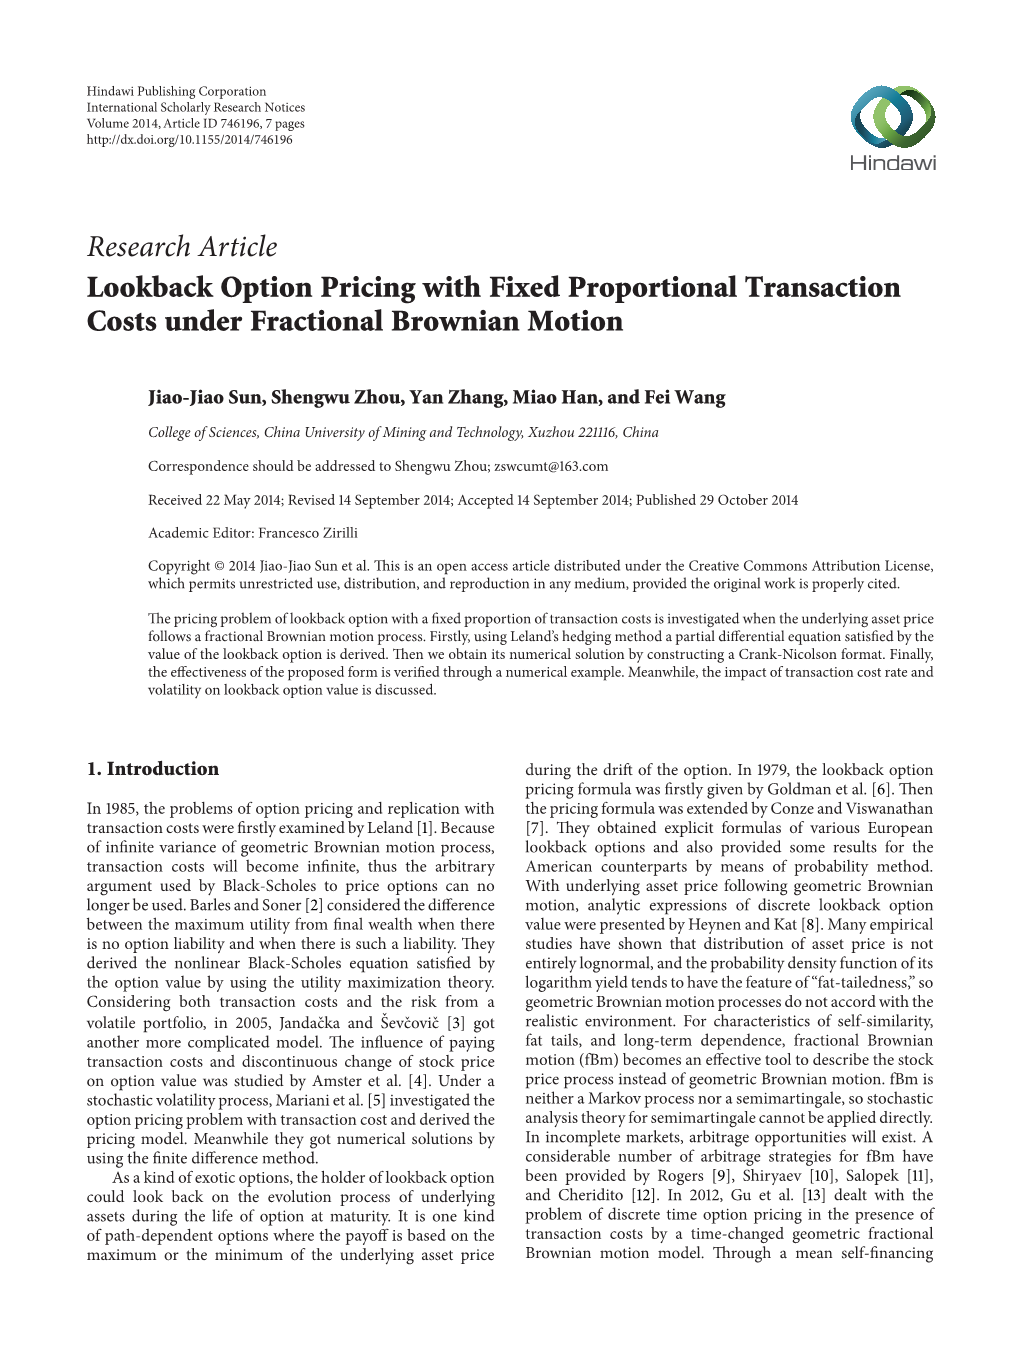 Lookback Option Pricing with Fixed Proportional Transaction Costs Under Fractional Brownian Motion